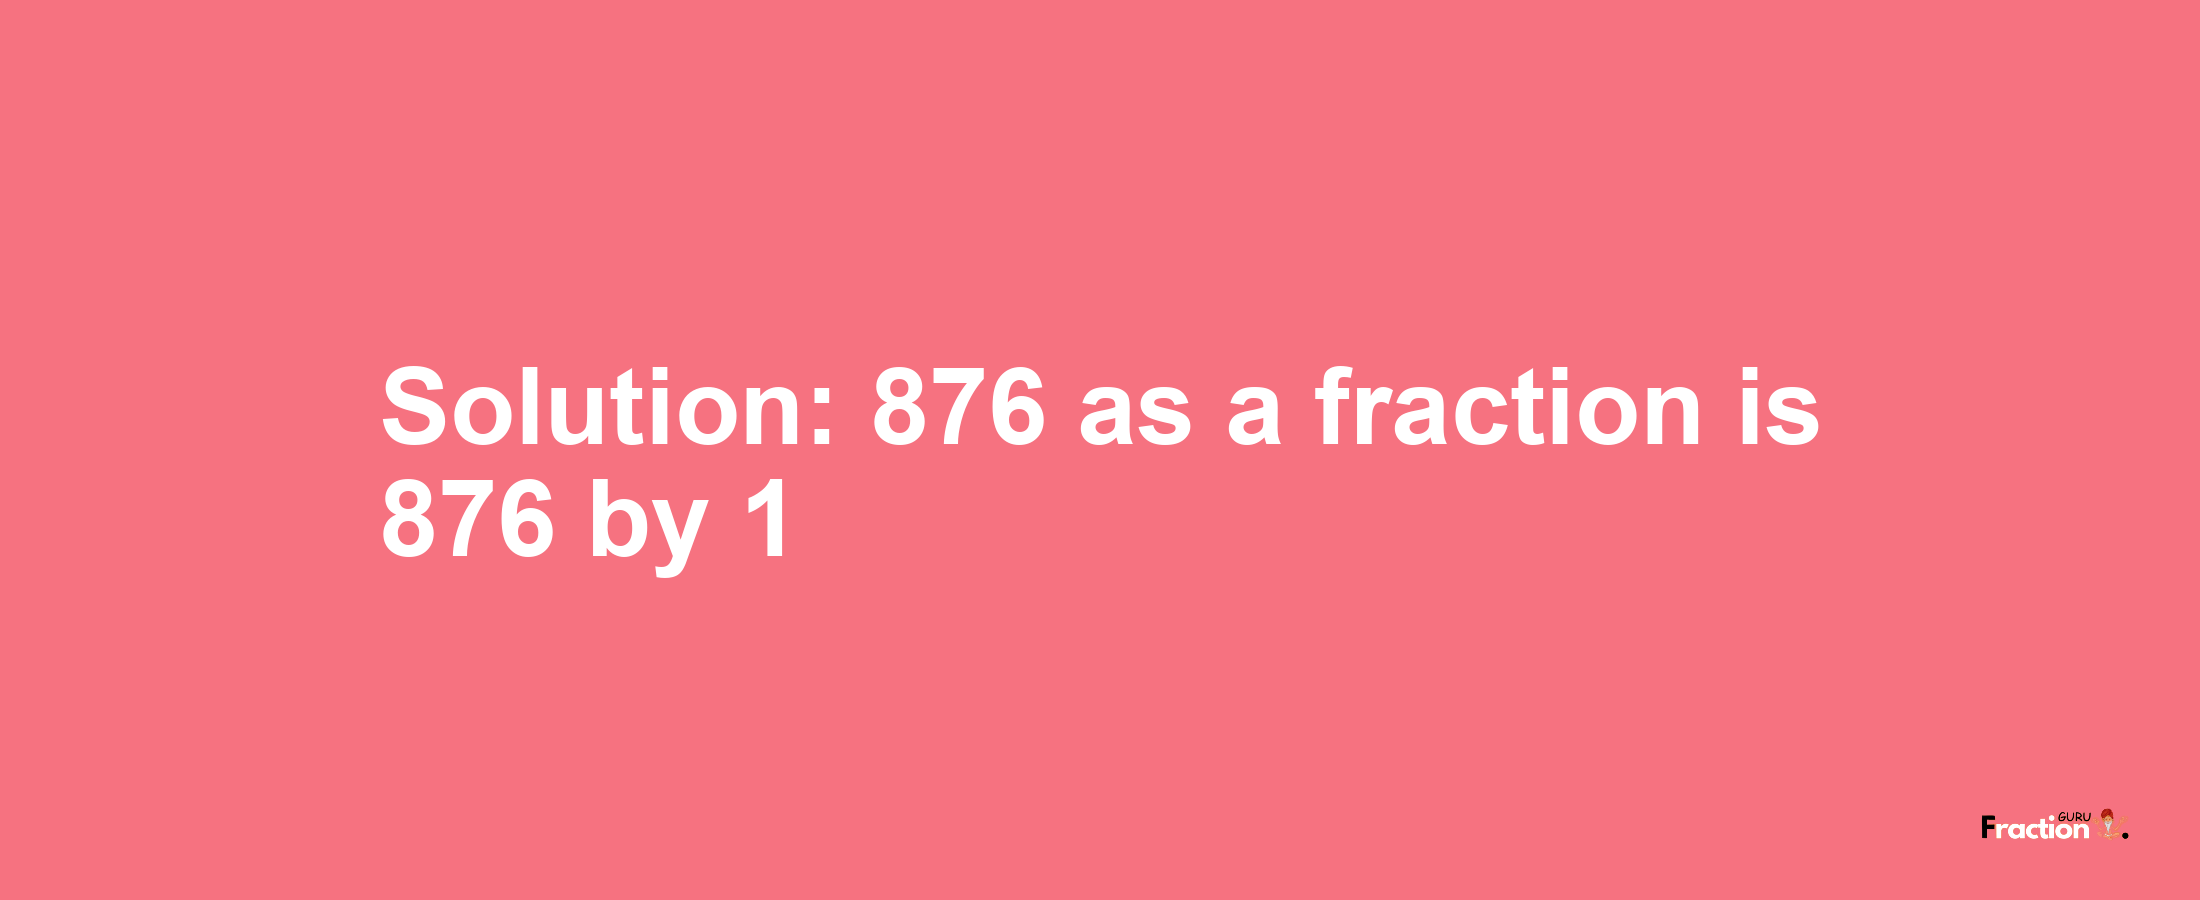 Solution:876 as a fraction is 876/1